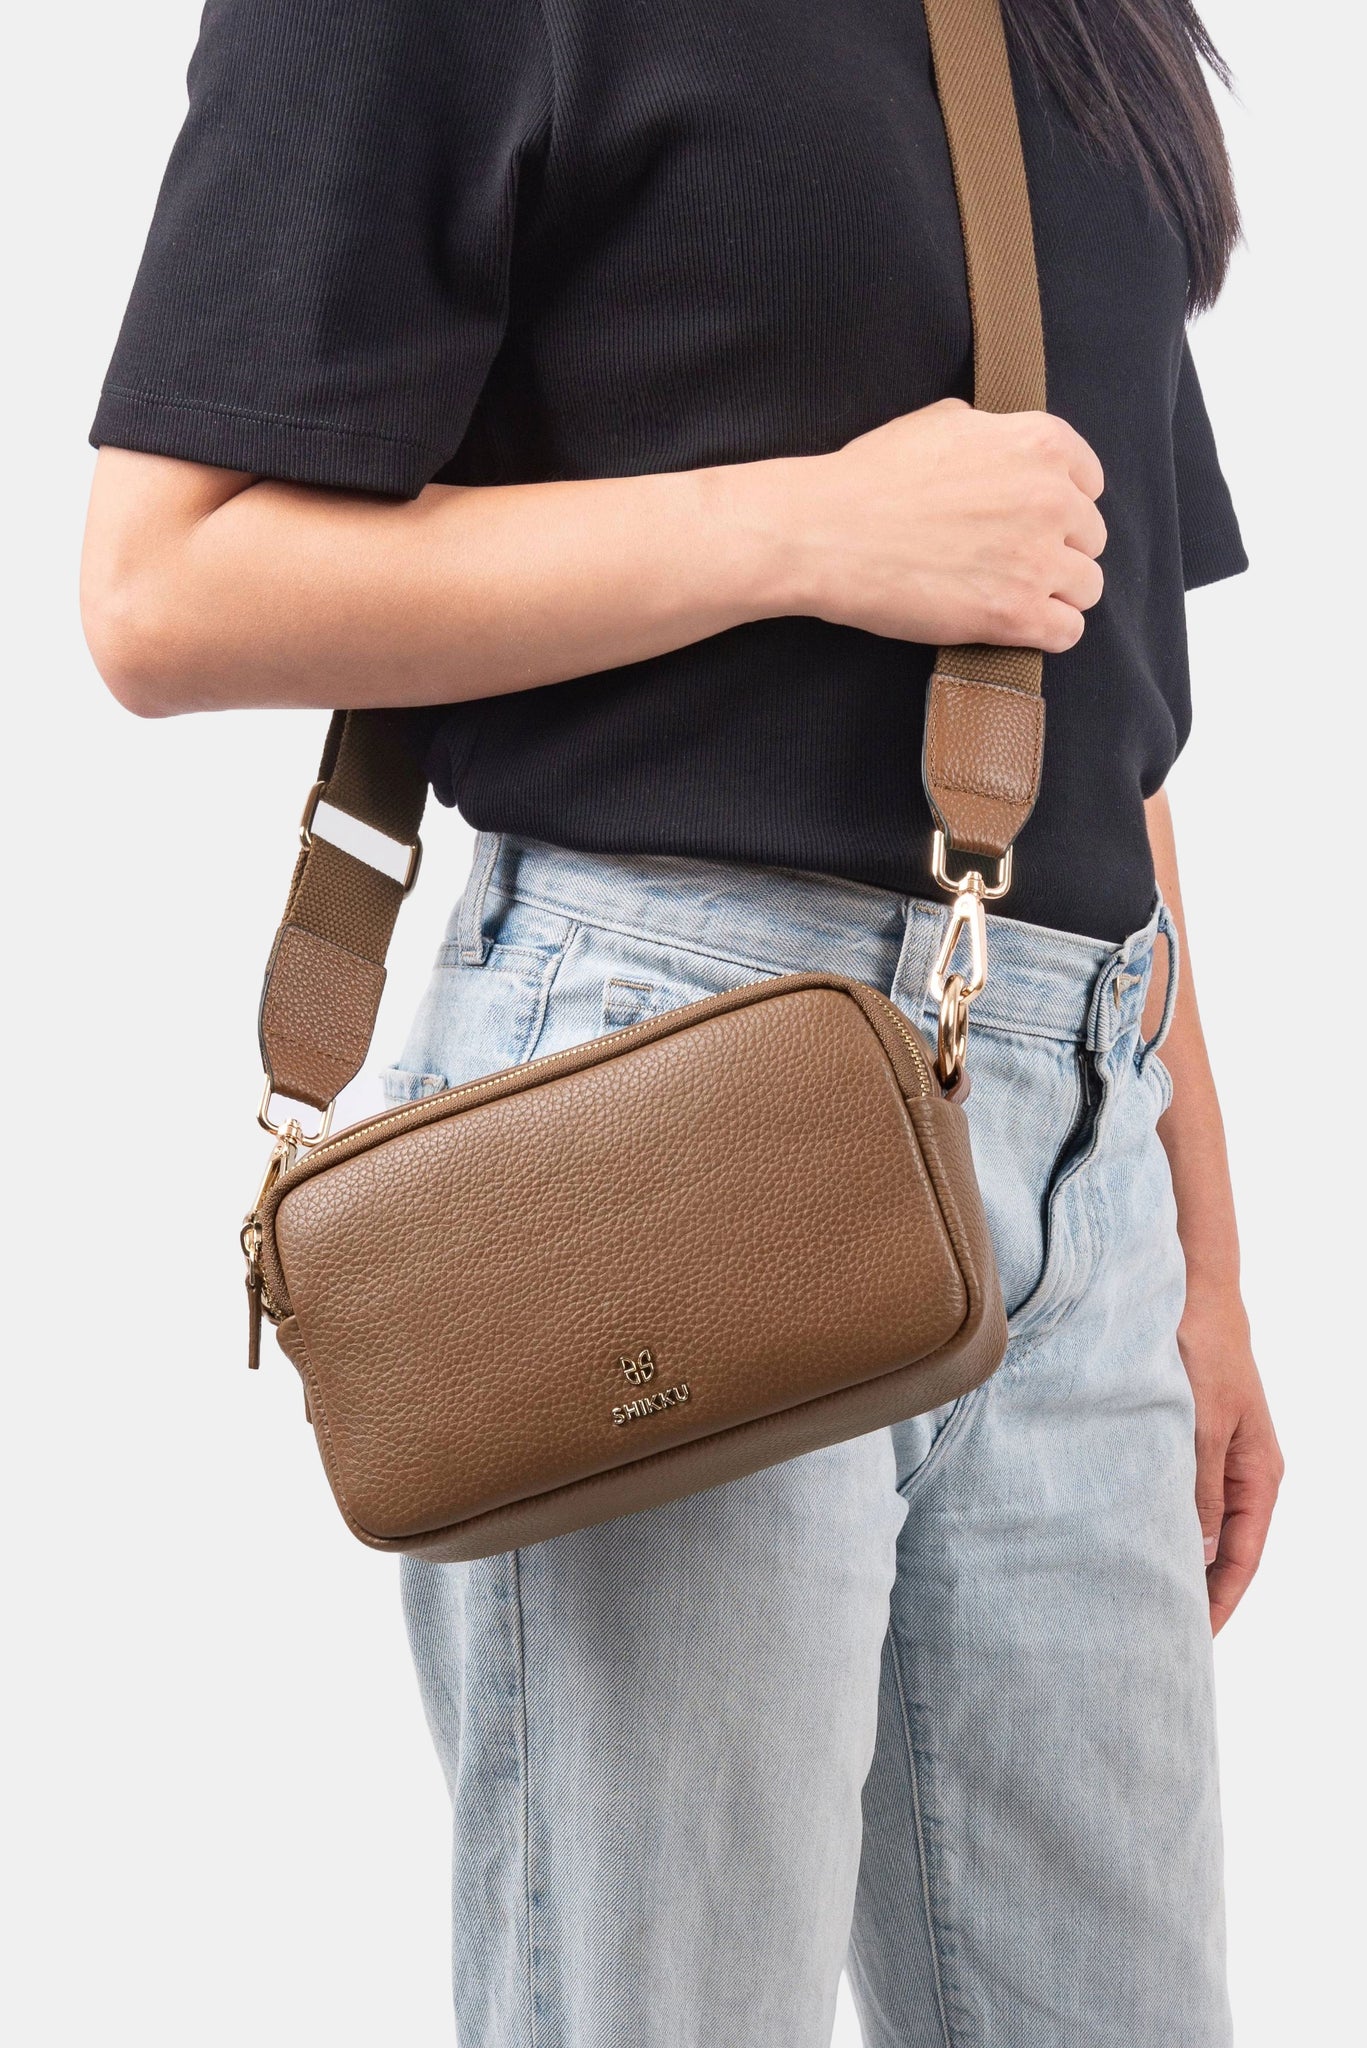 Camera Leather Bag - Tabac Brown